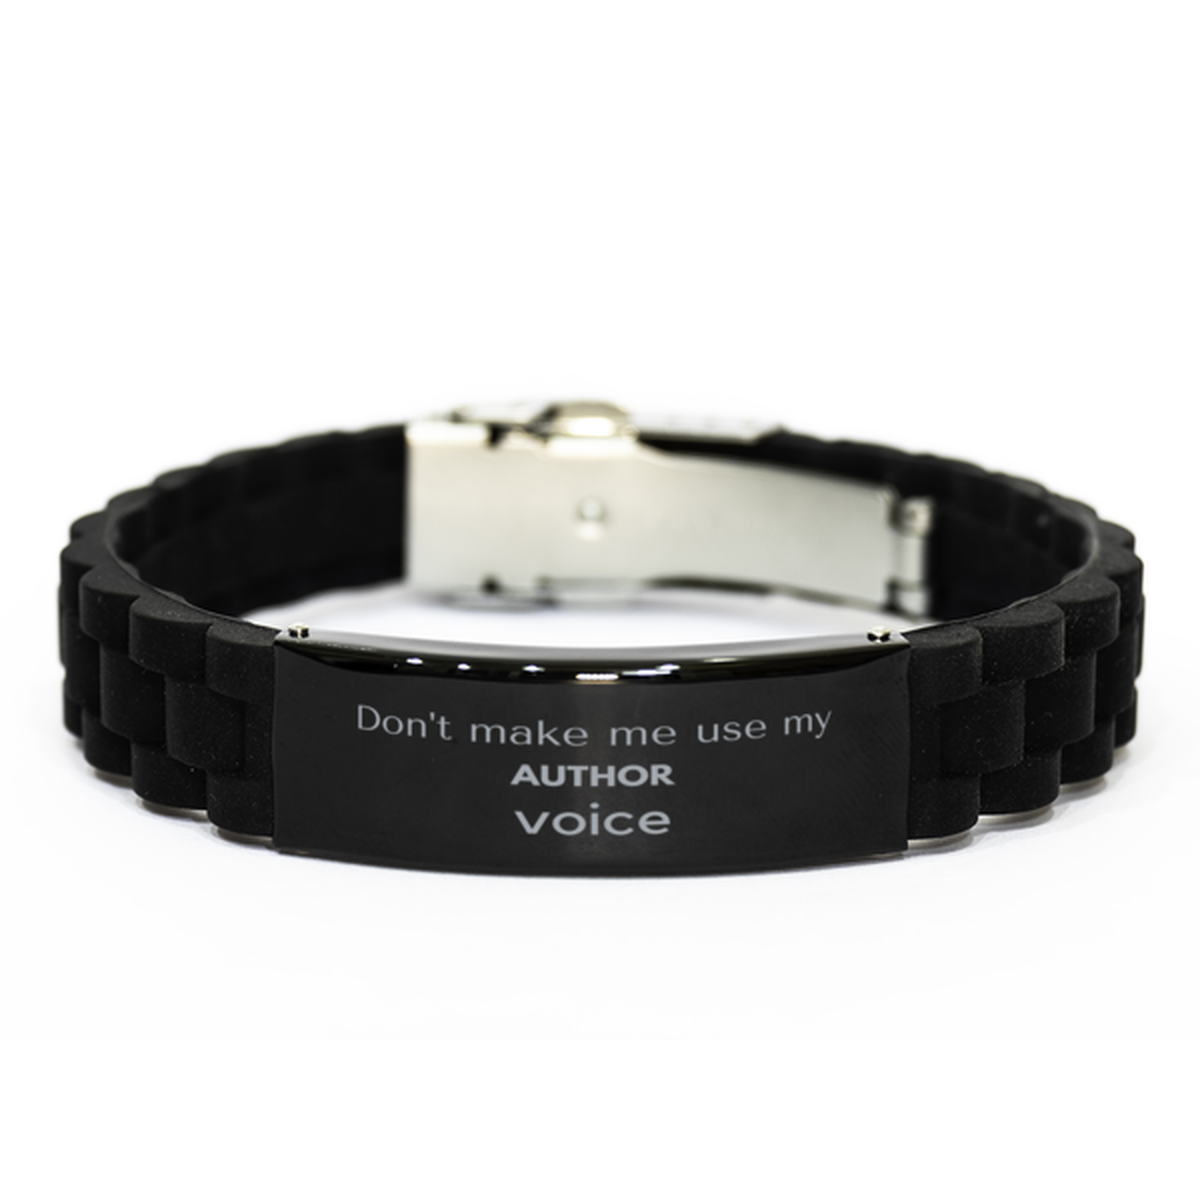 Don't make me use my Author voice, Sarcasm Author Gifts, Christmas Author Black Glidelock Clasp Bracelet Birthday Unique Gifts For Author Coworkers, Men, Women, Colleague, Friends